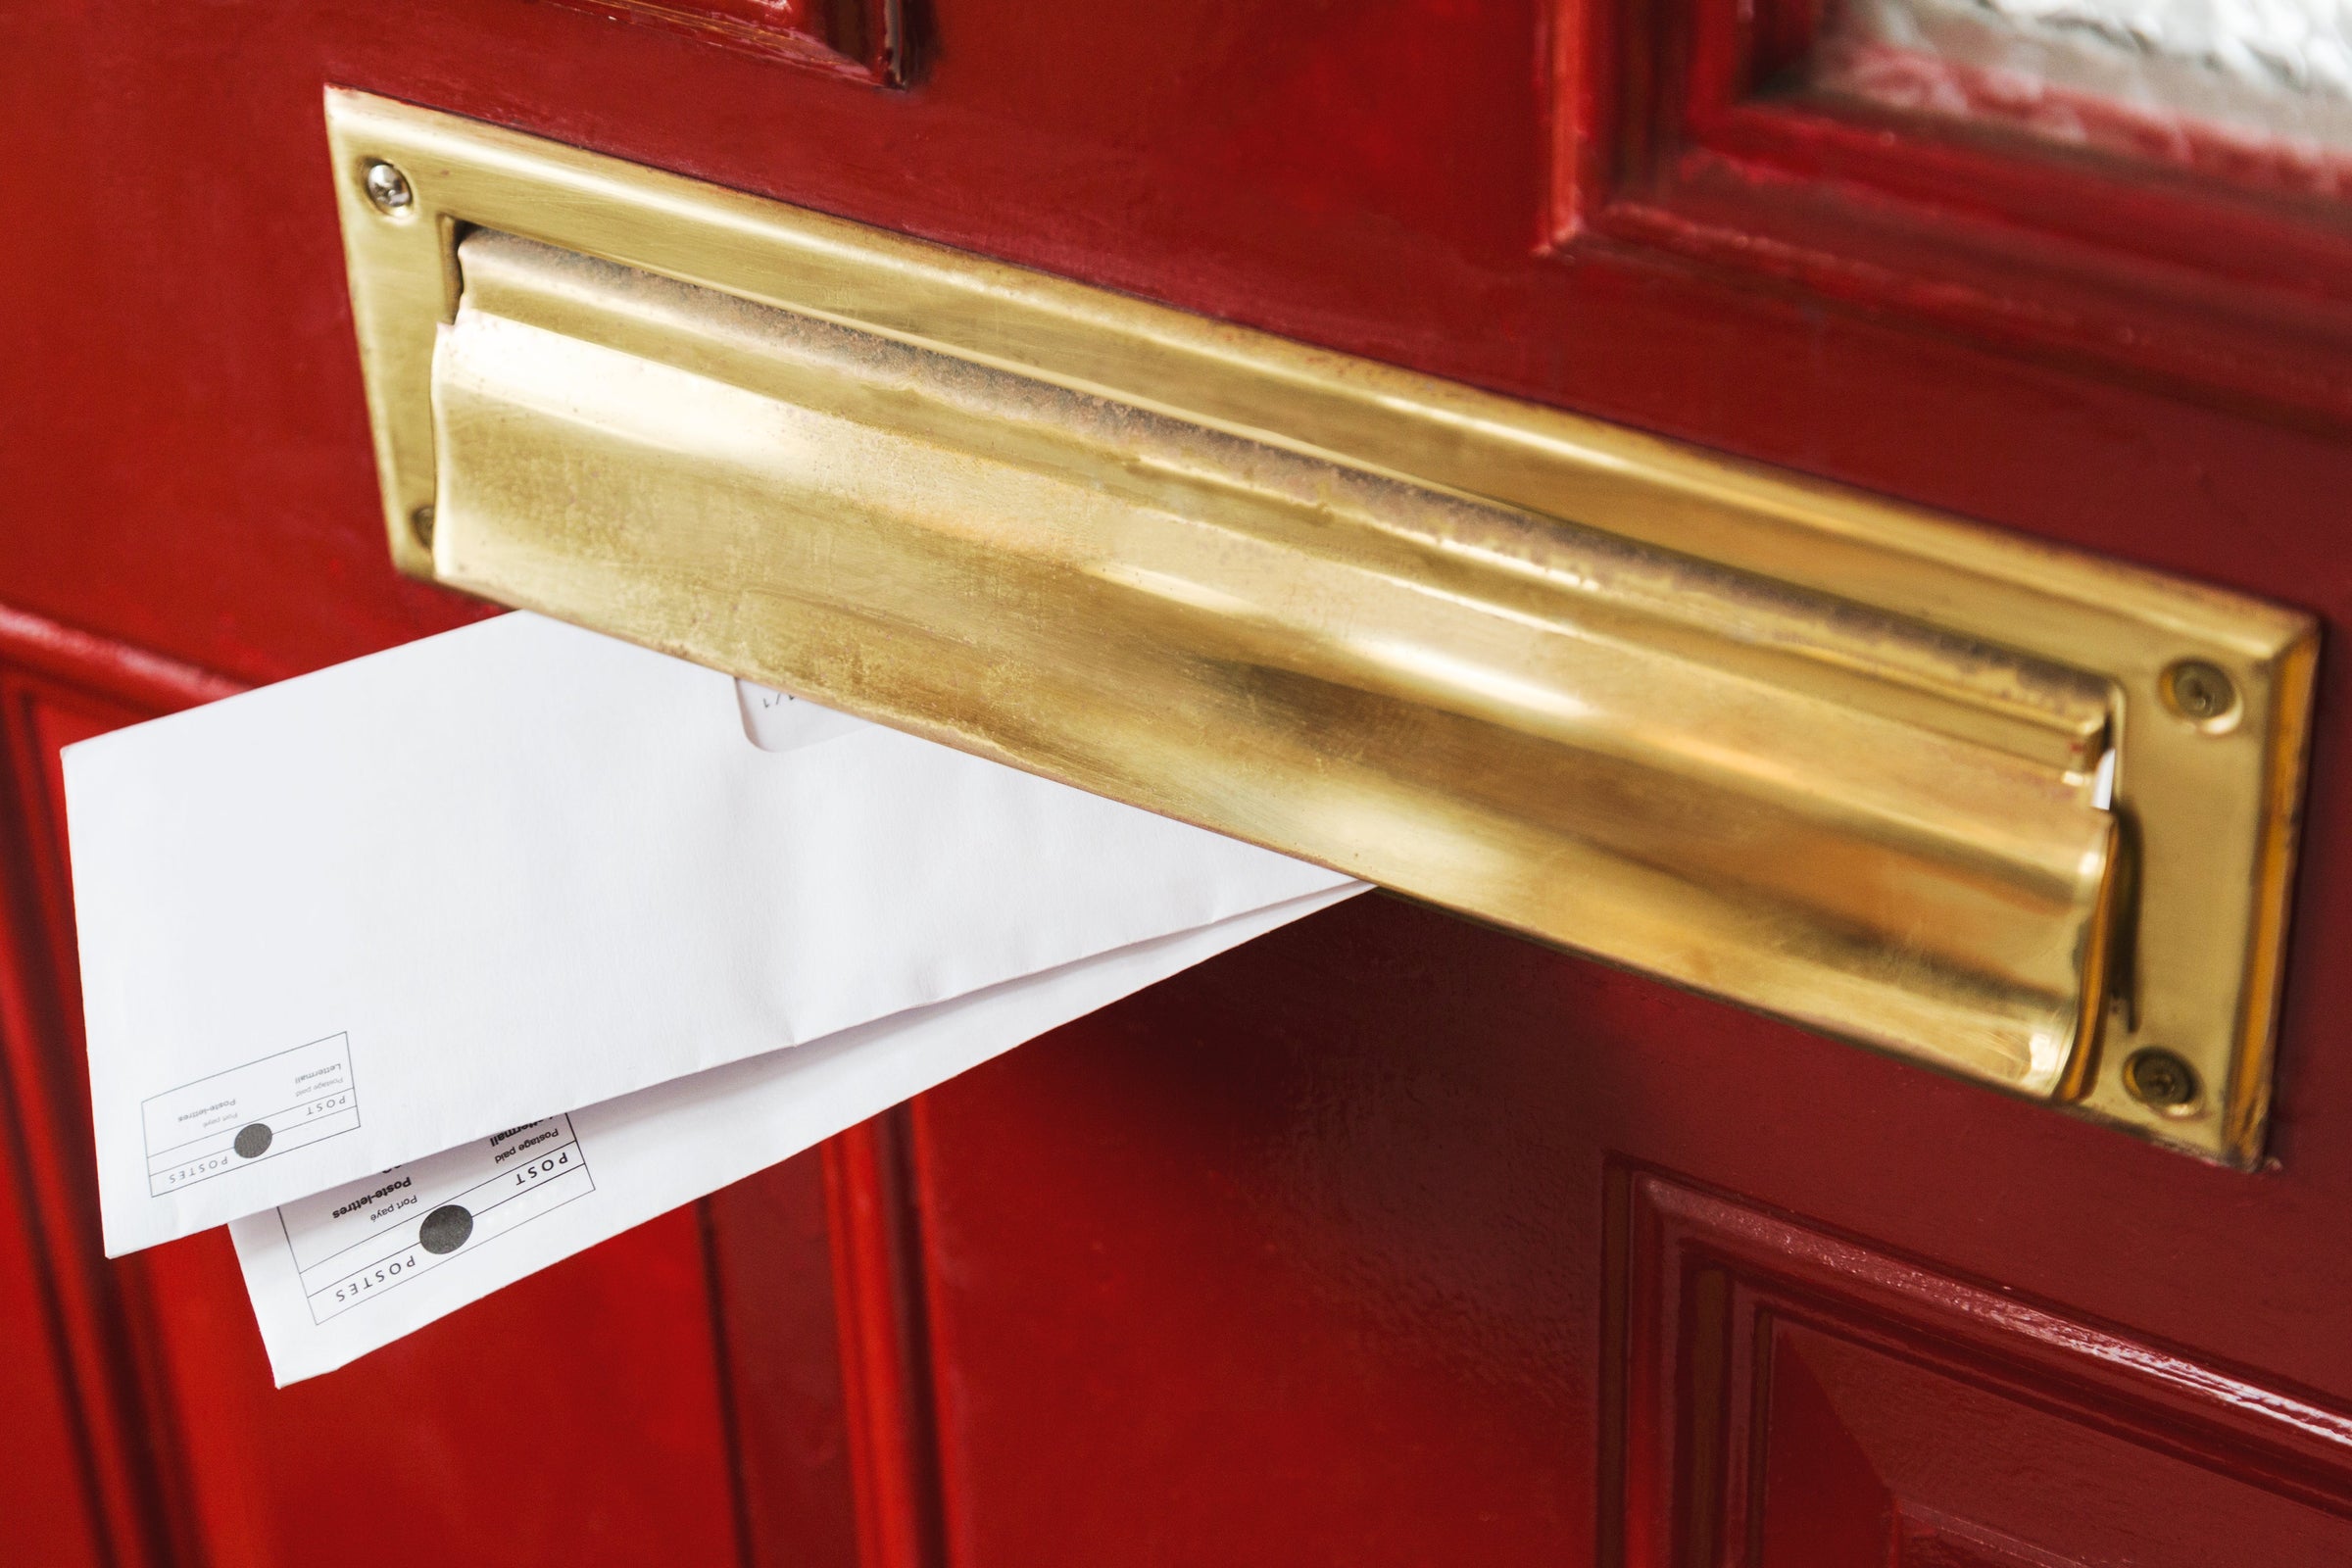 Mail Delivery with Tracking Number